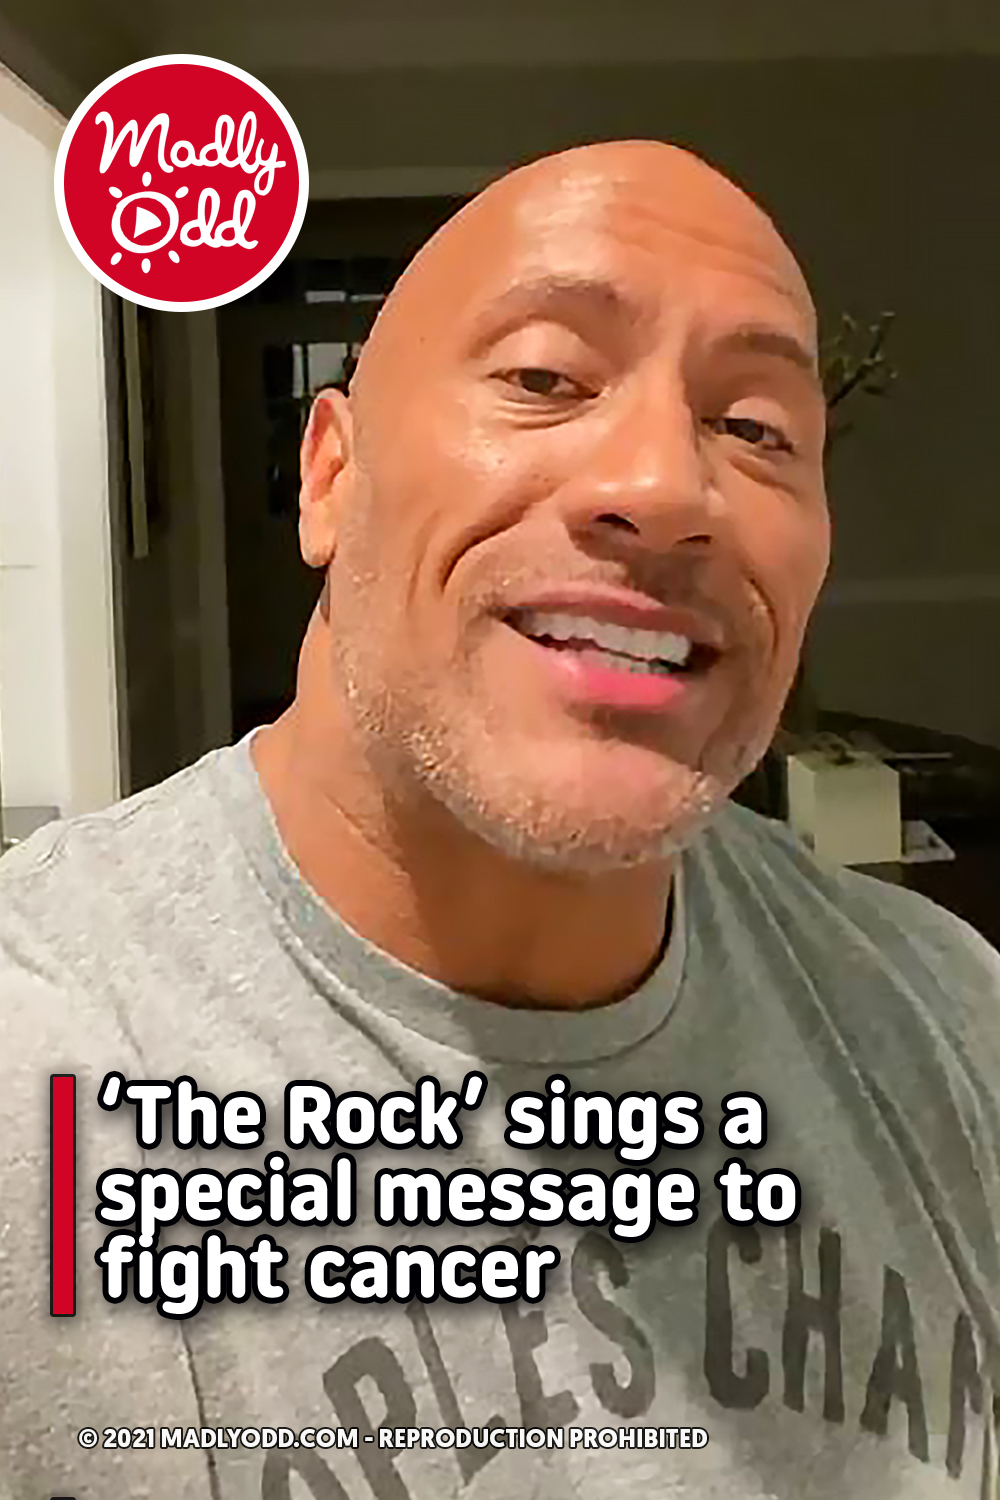 ‘The Rock’ sings a special message to fight cancer